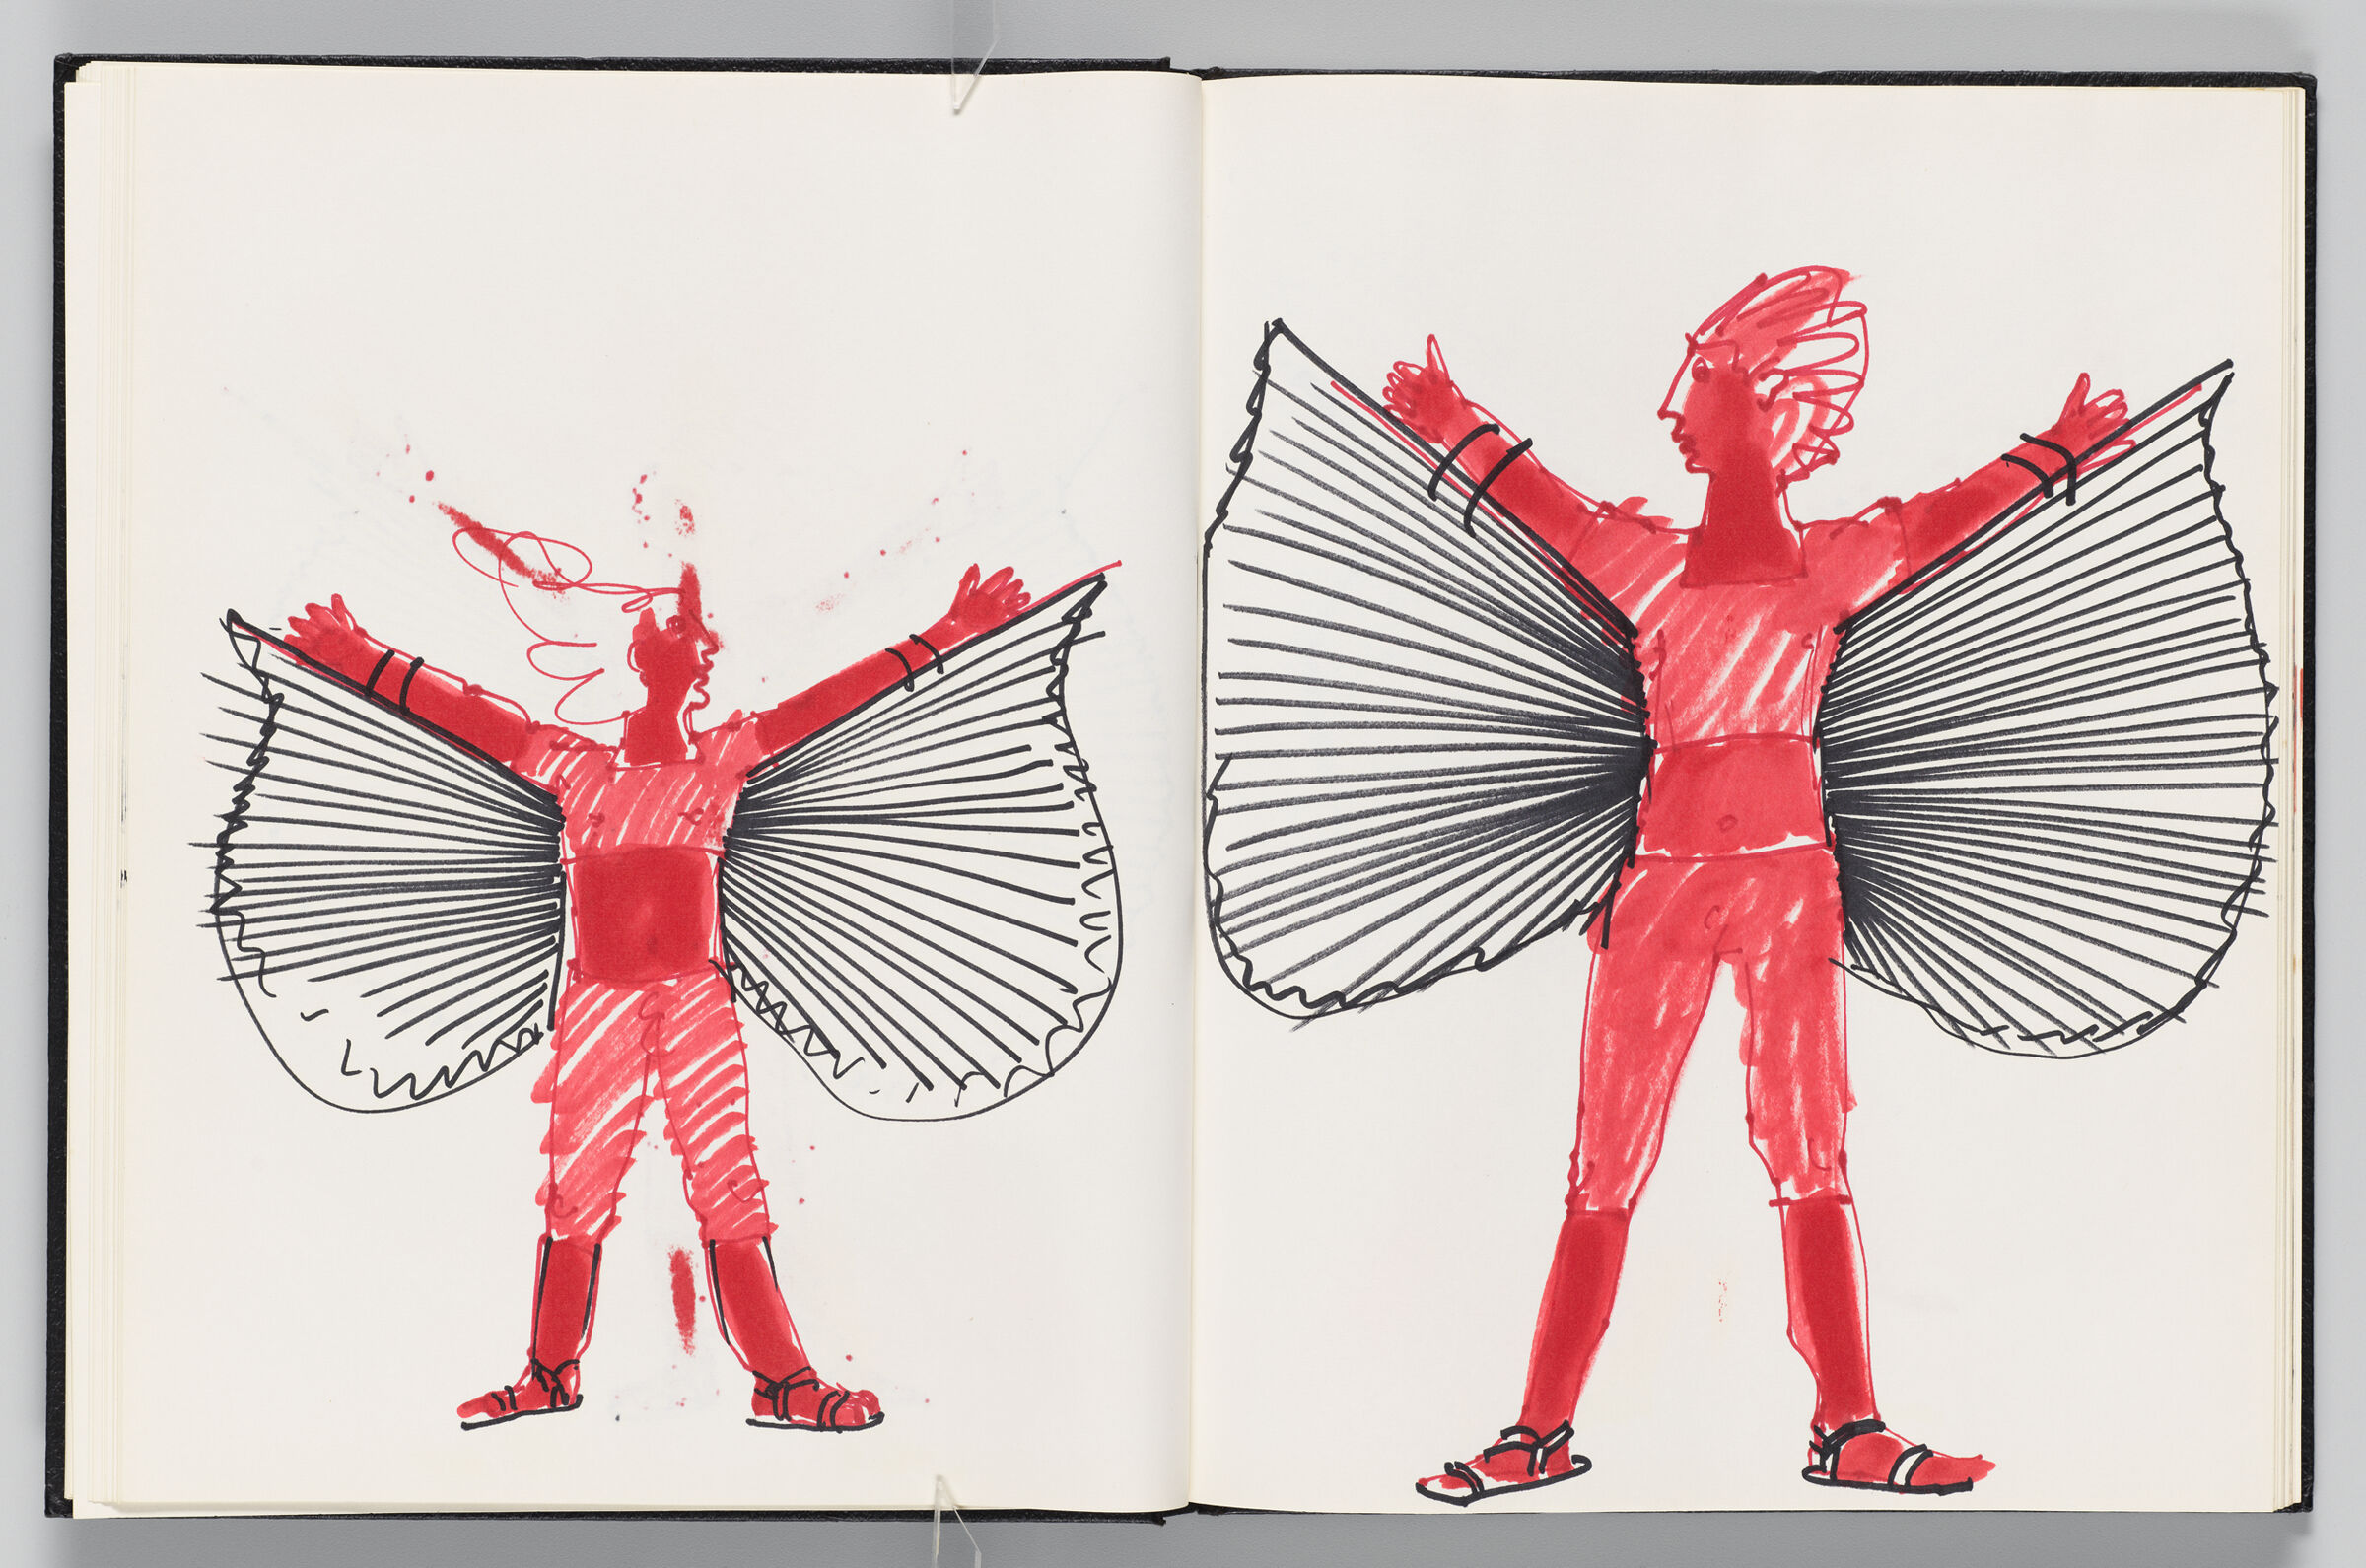 Untitled (Bleed-Through Of Previous Page, Left Page); Untitled (Icarus Costume, Right Page)